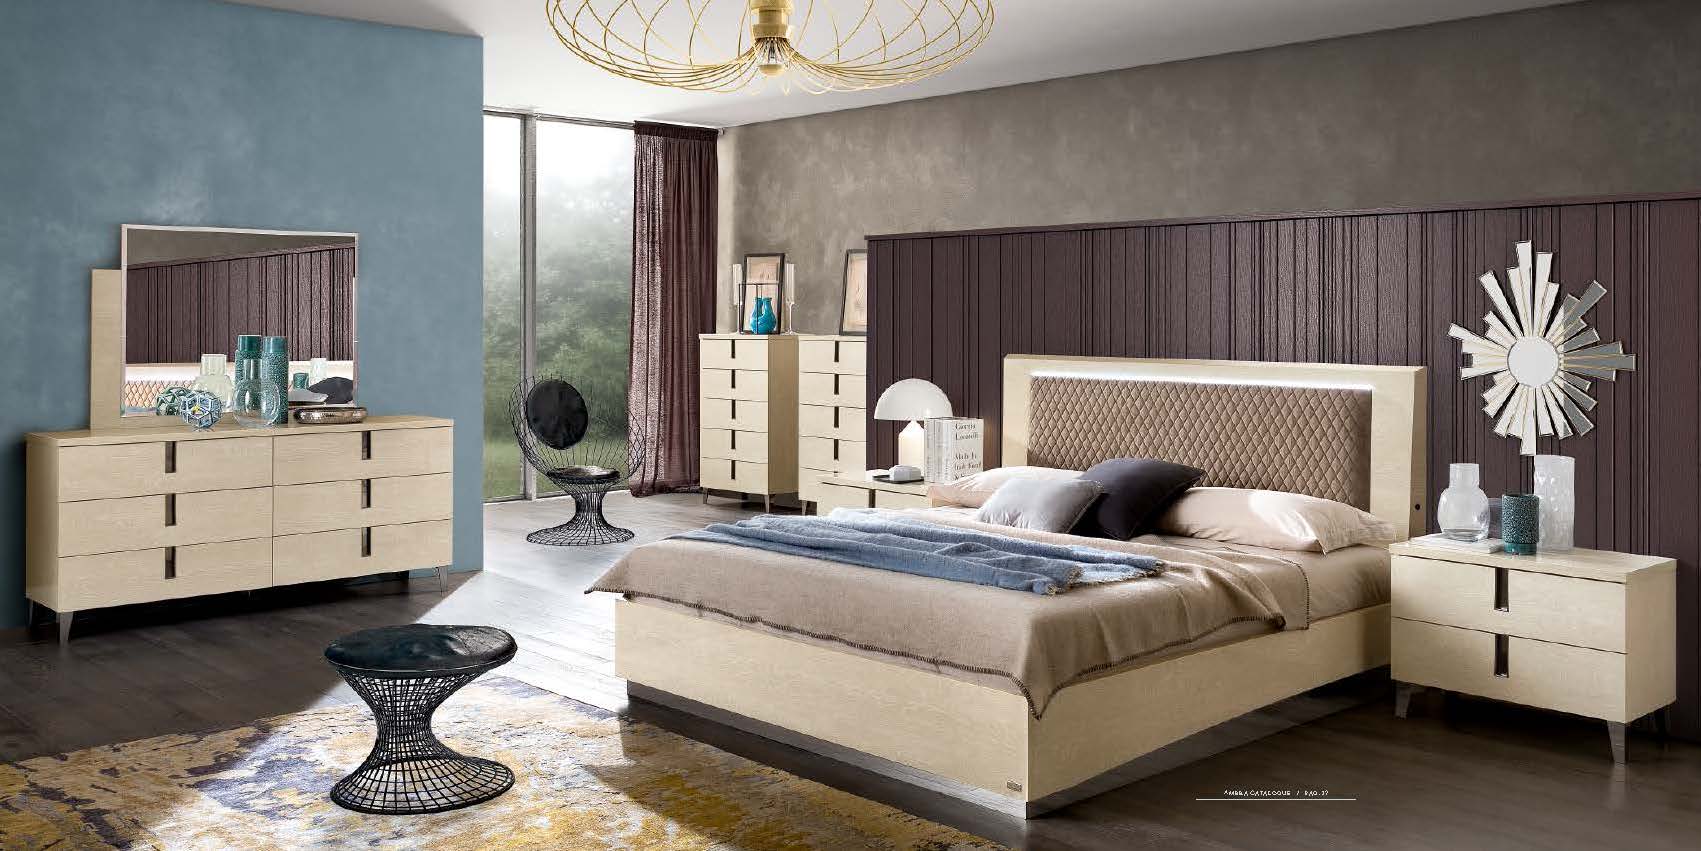 Bedroom Furniture Beds with storage Ambra Bedroom Additional Items